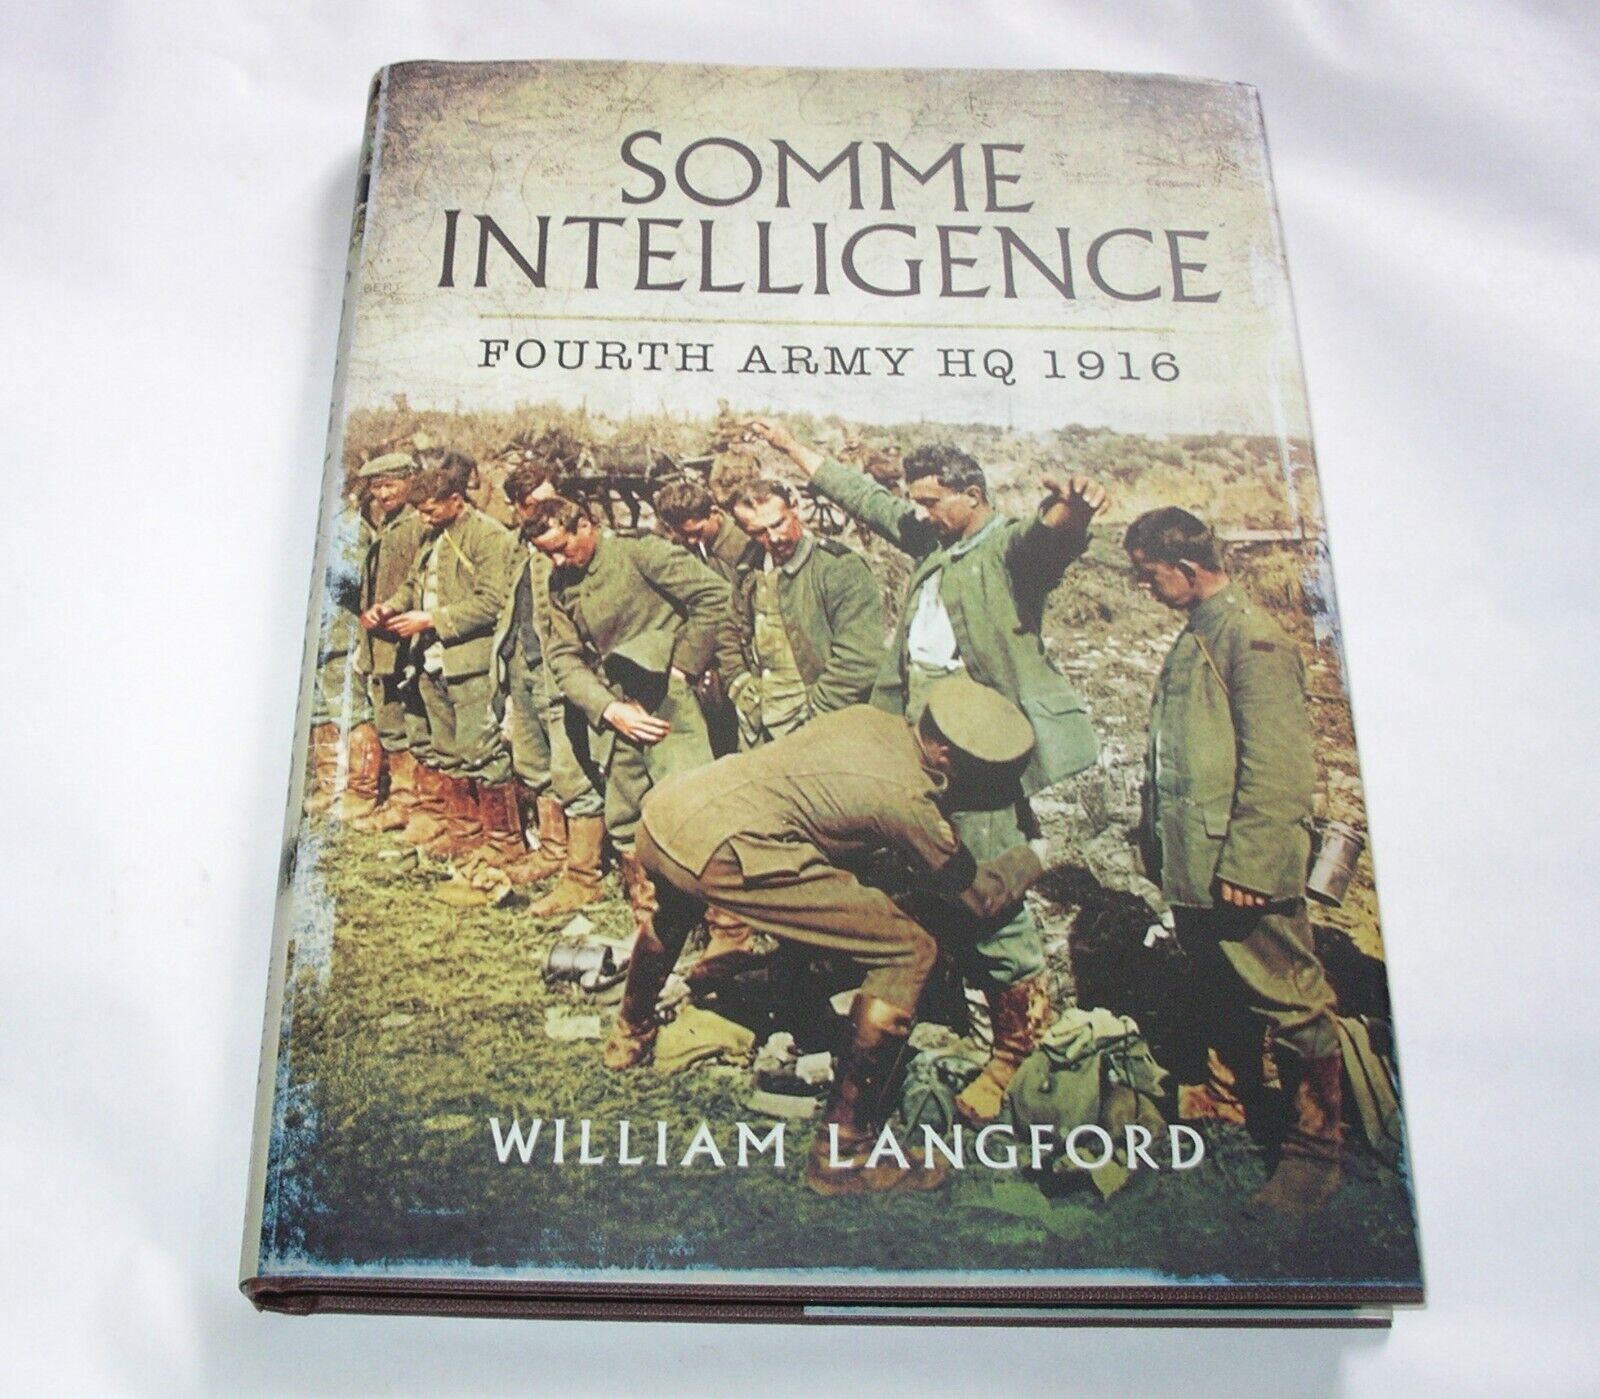 WW1 Book 4th ARMY HQ Somme Intelligence REPORTS & CAPTURED DOCUMENTS